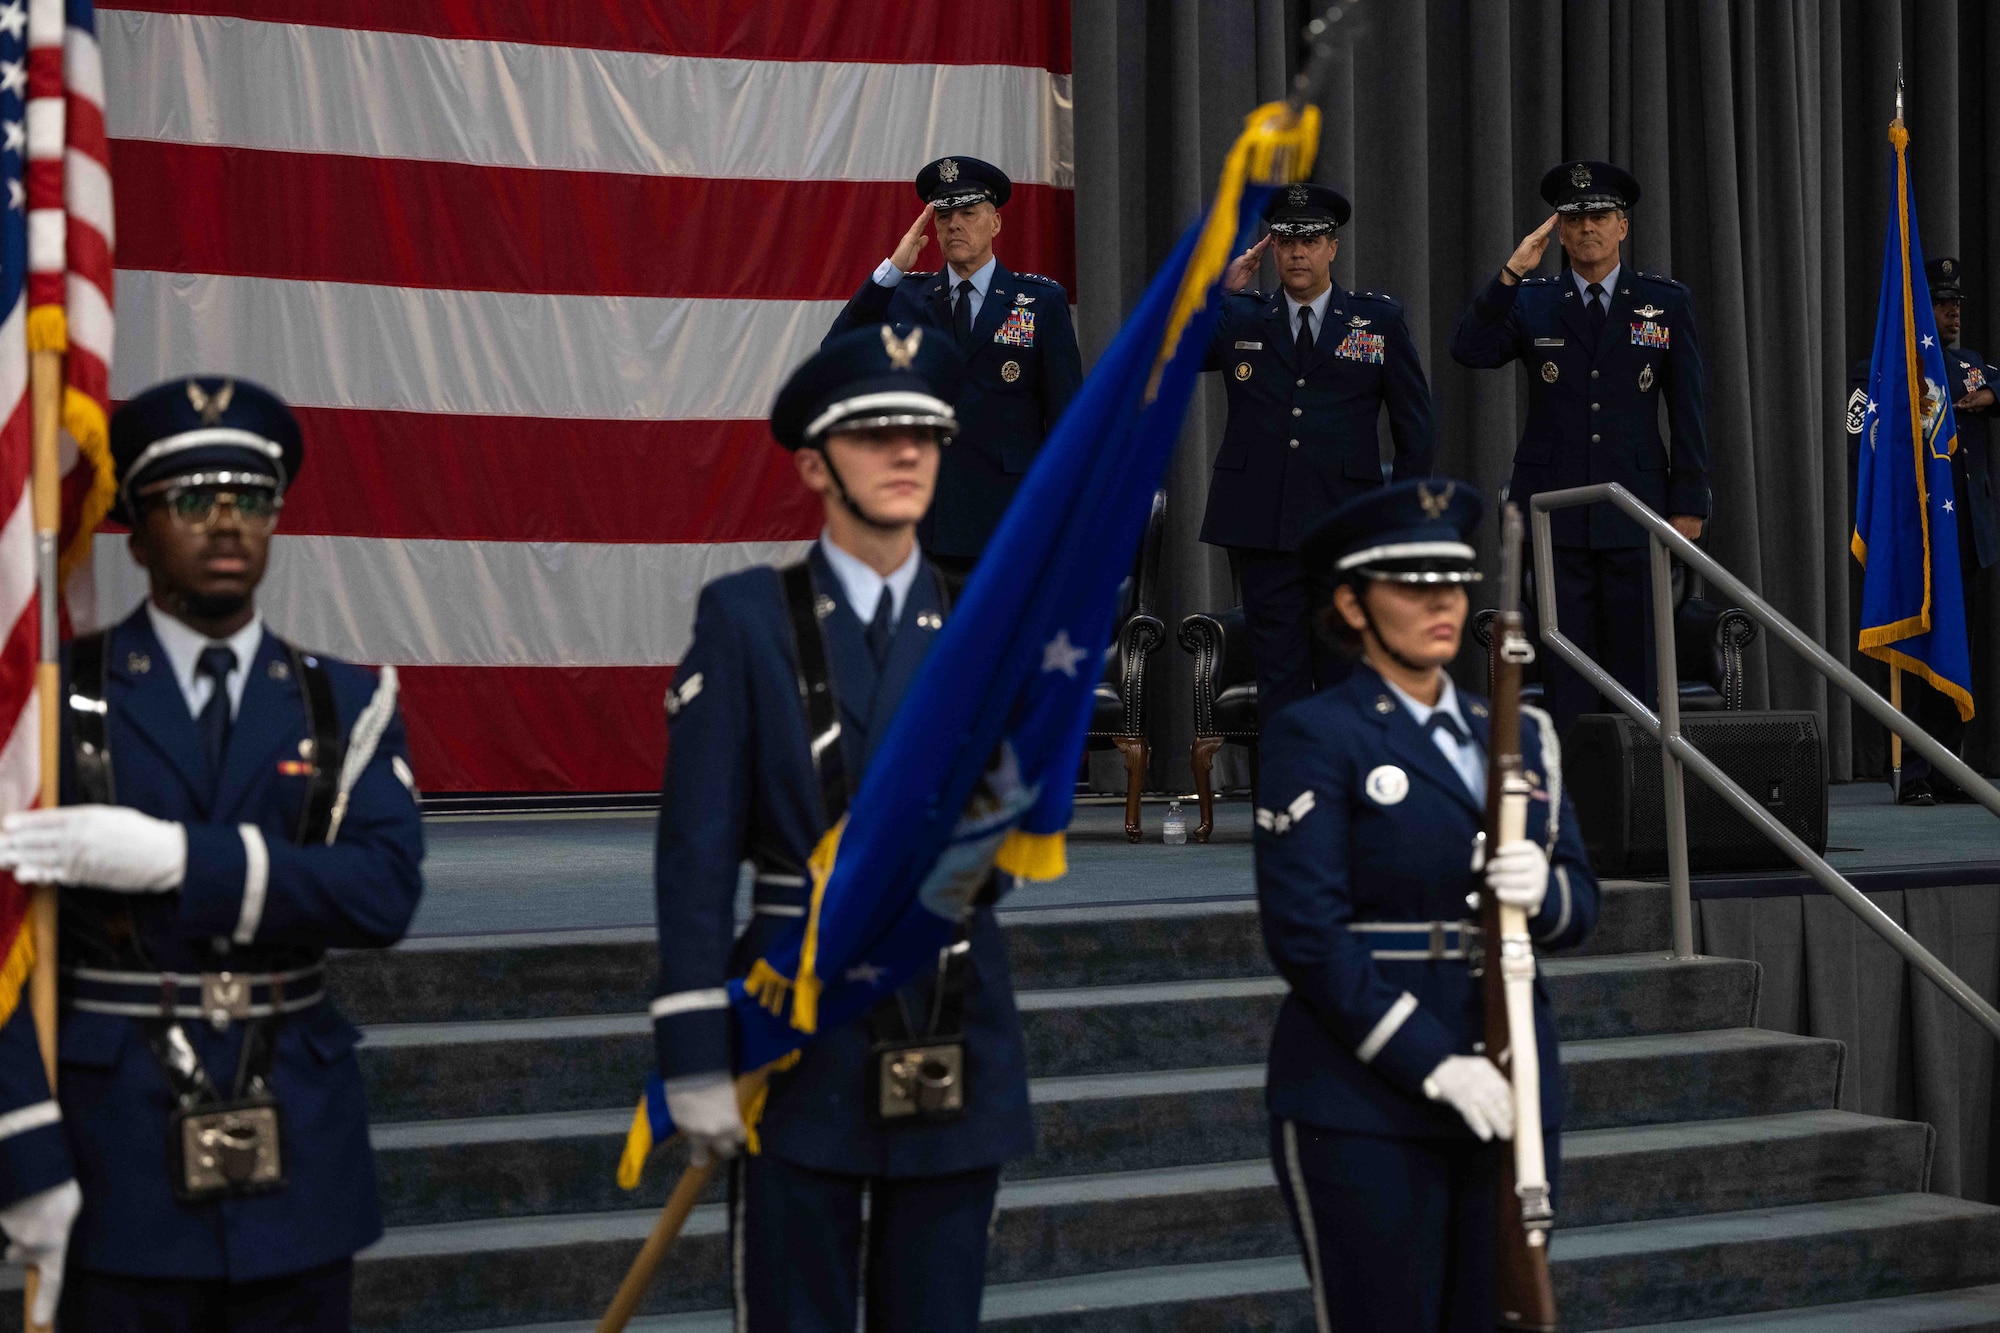 Barksdale AFB honor guard